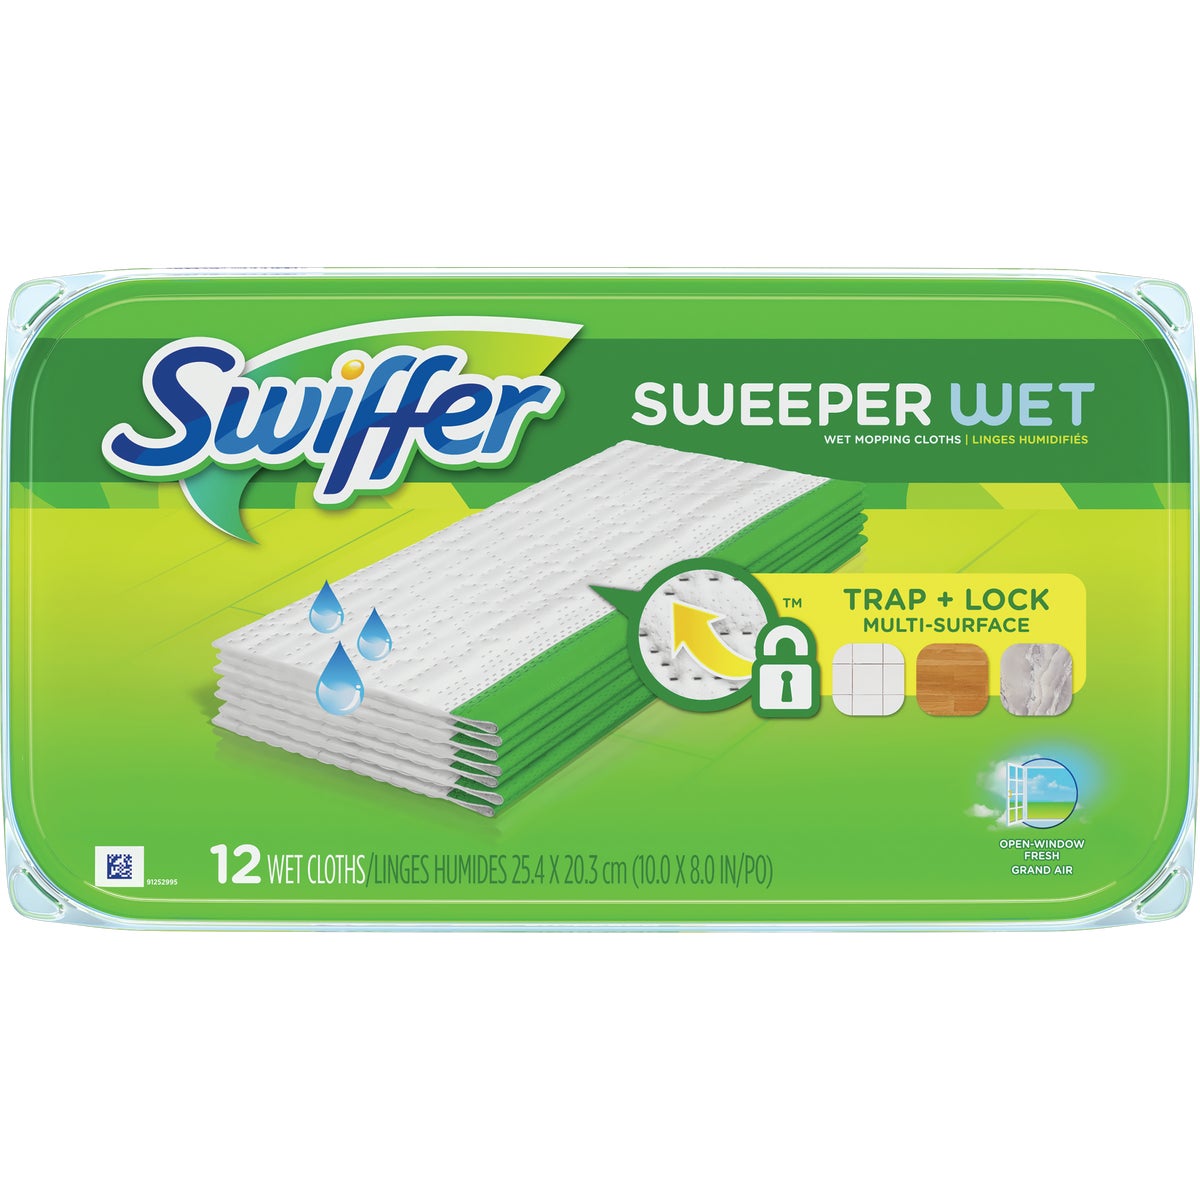 Item 619478, Replacement cloths for Swiffer starter kit.